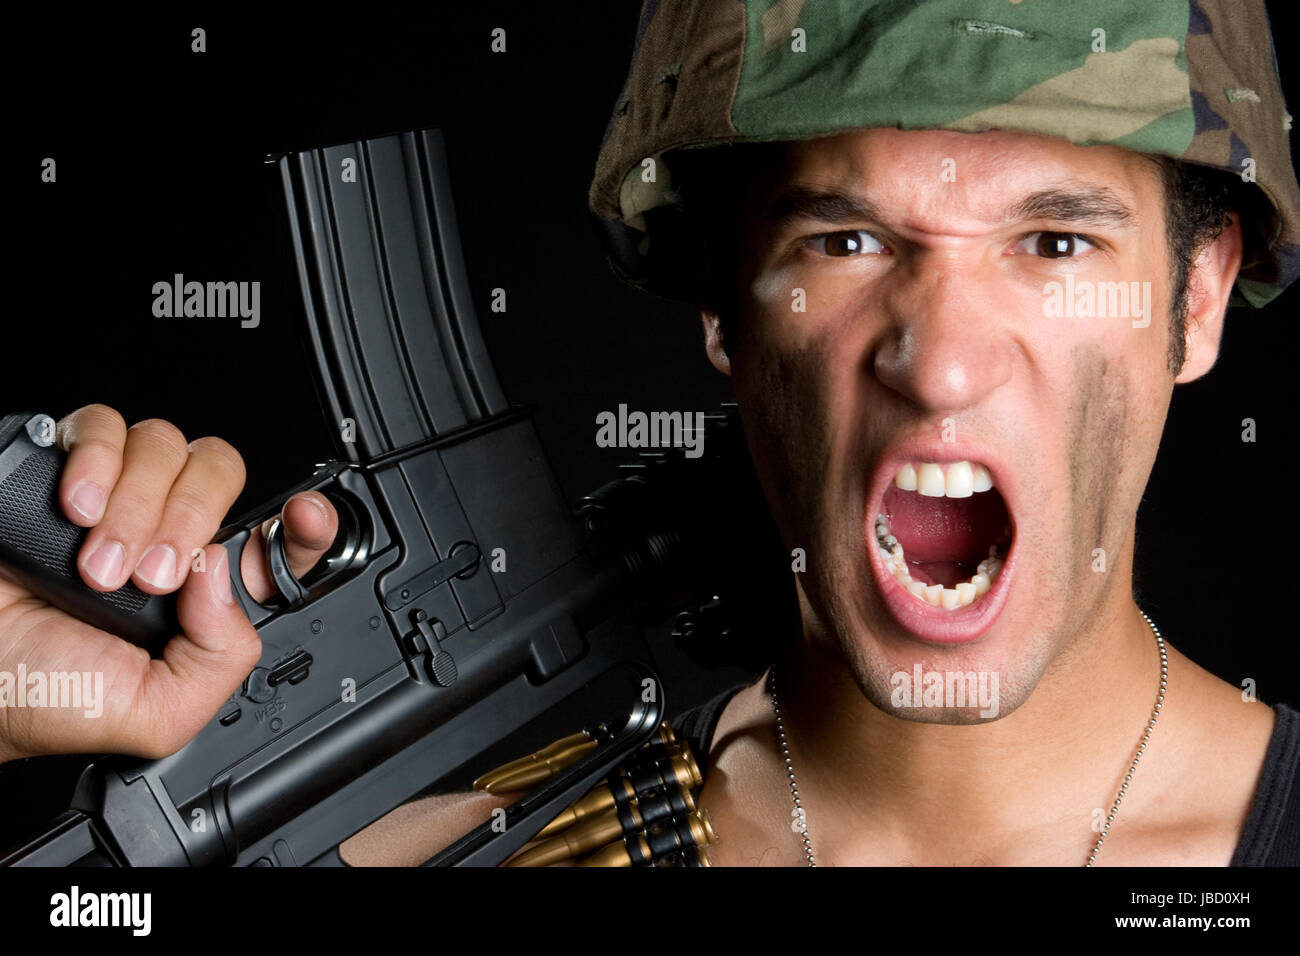 Angry military soldier holding gun Stock Photo